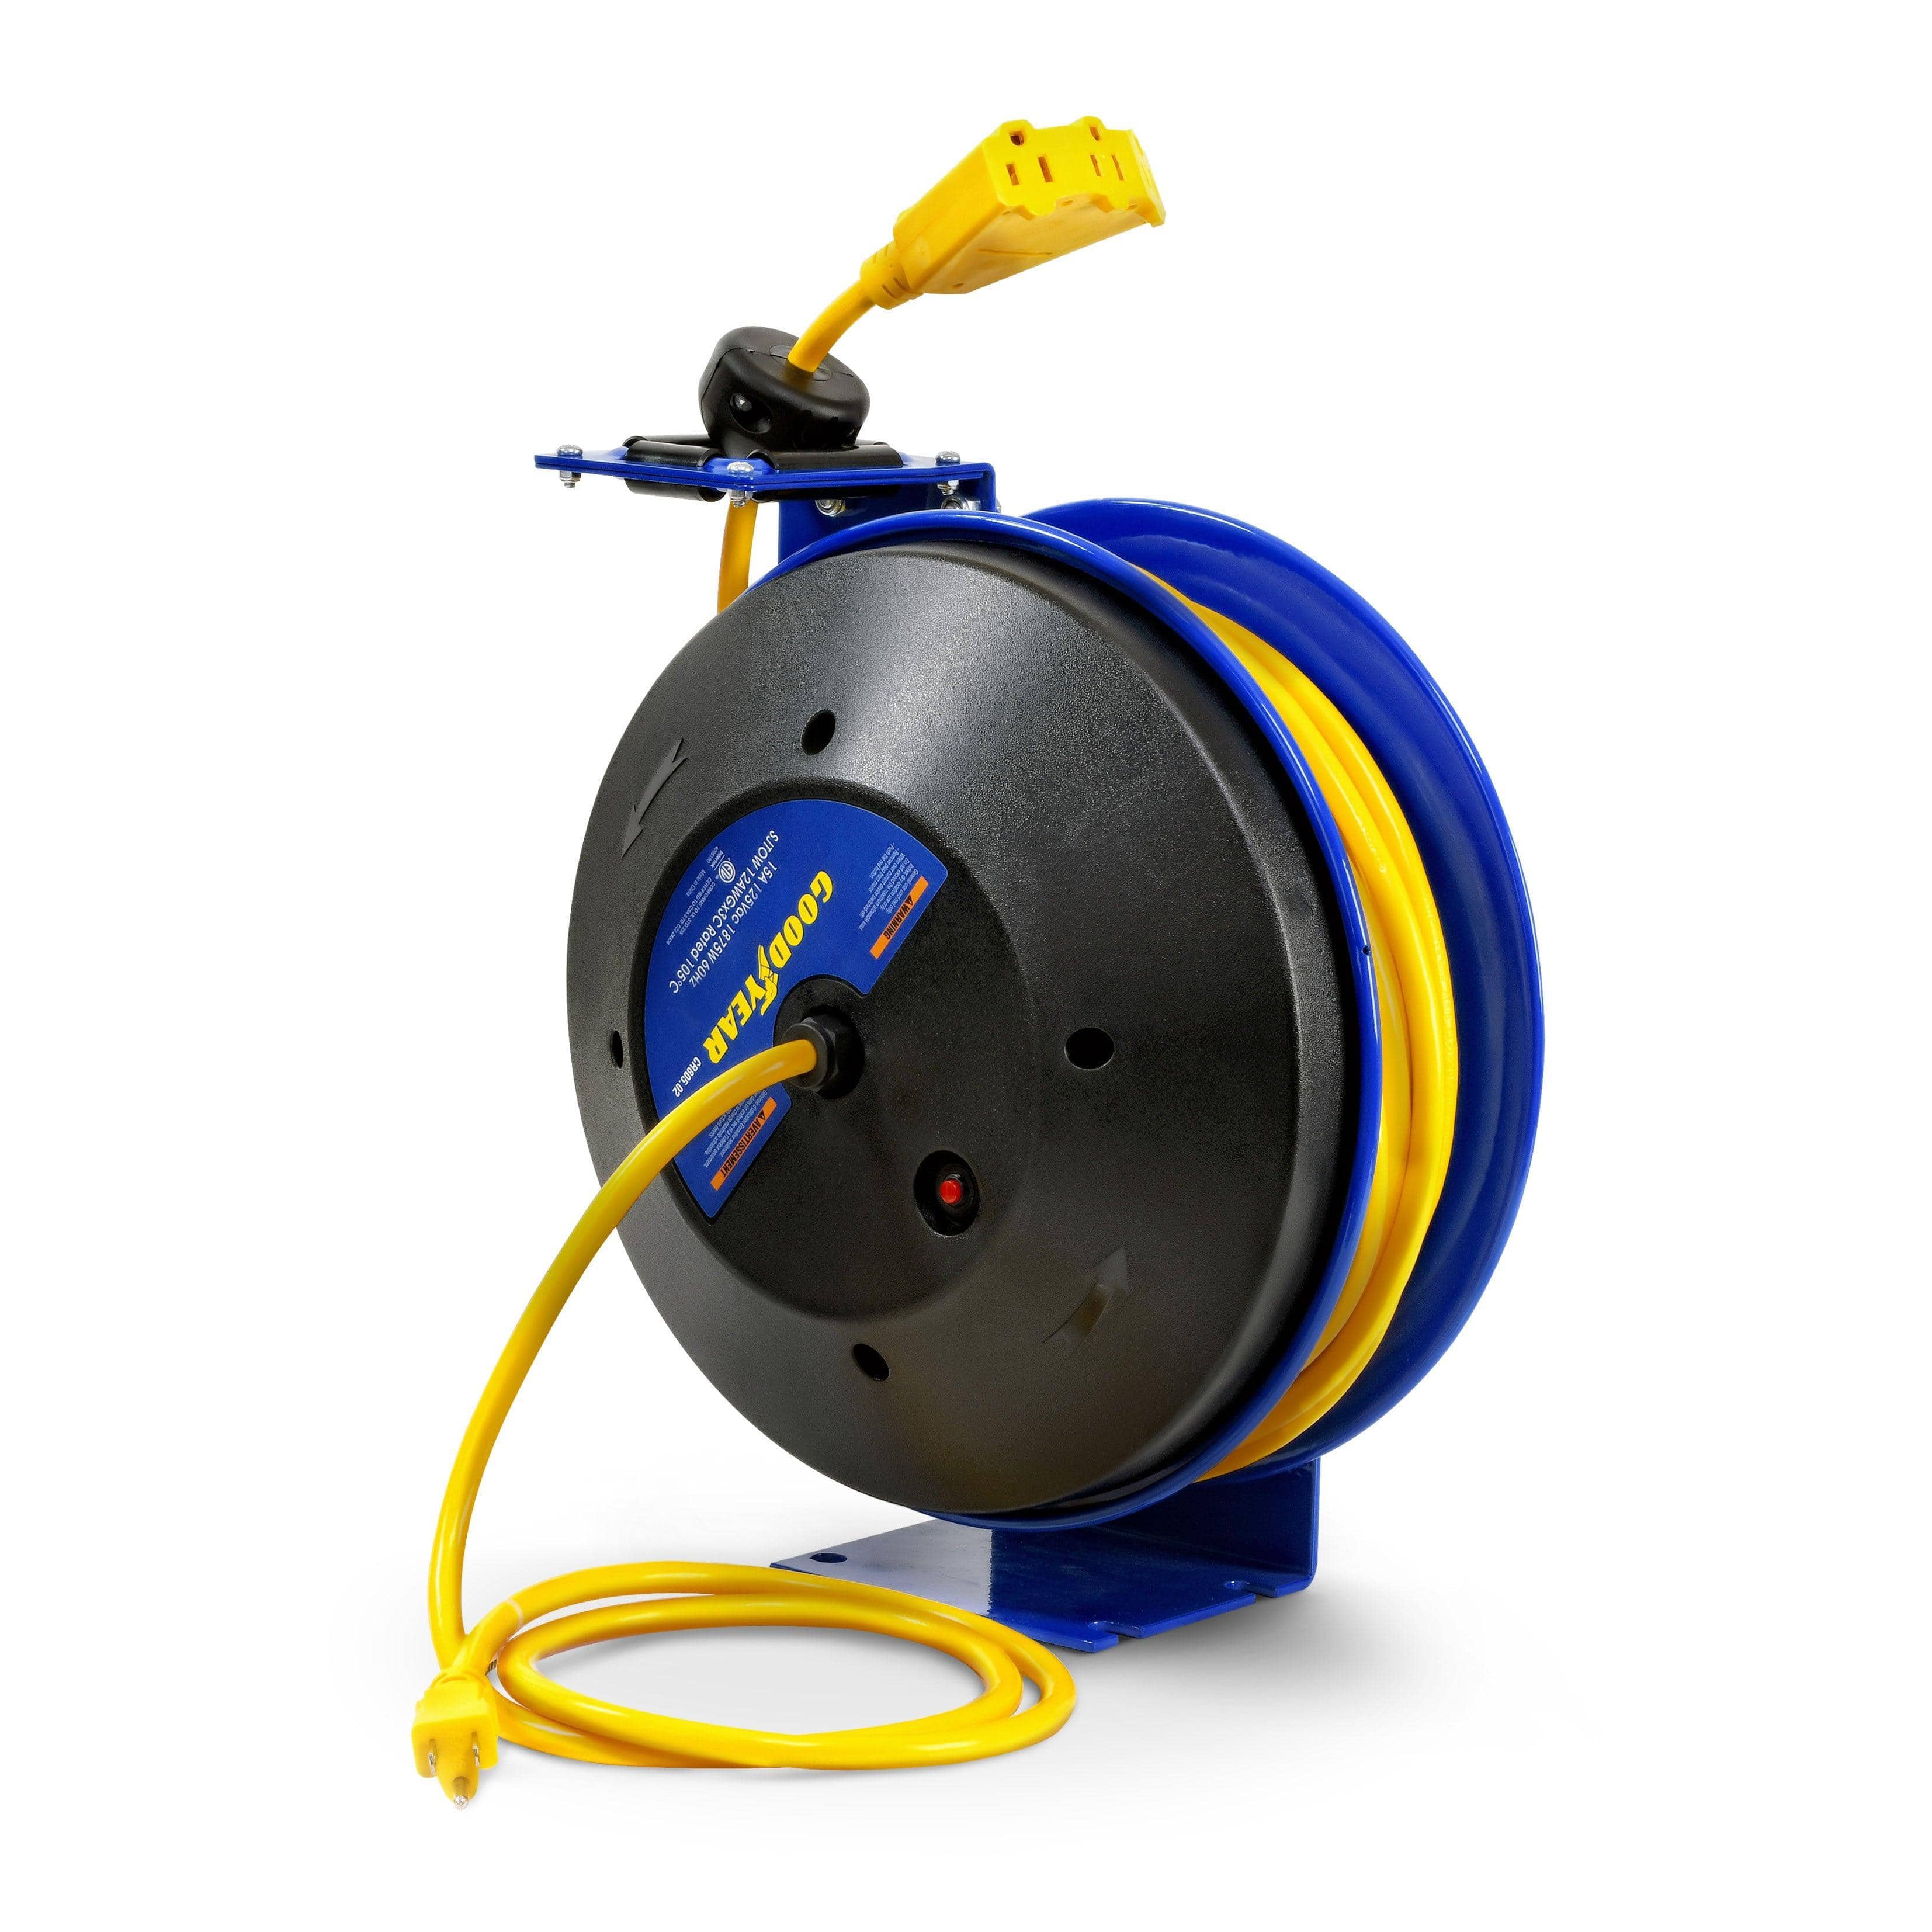 Goodyear Industrial Retractable Extension Cord Reel - 12AWG x 50' Ft